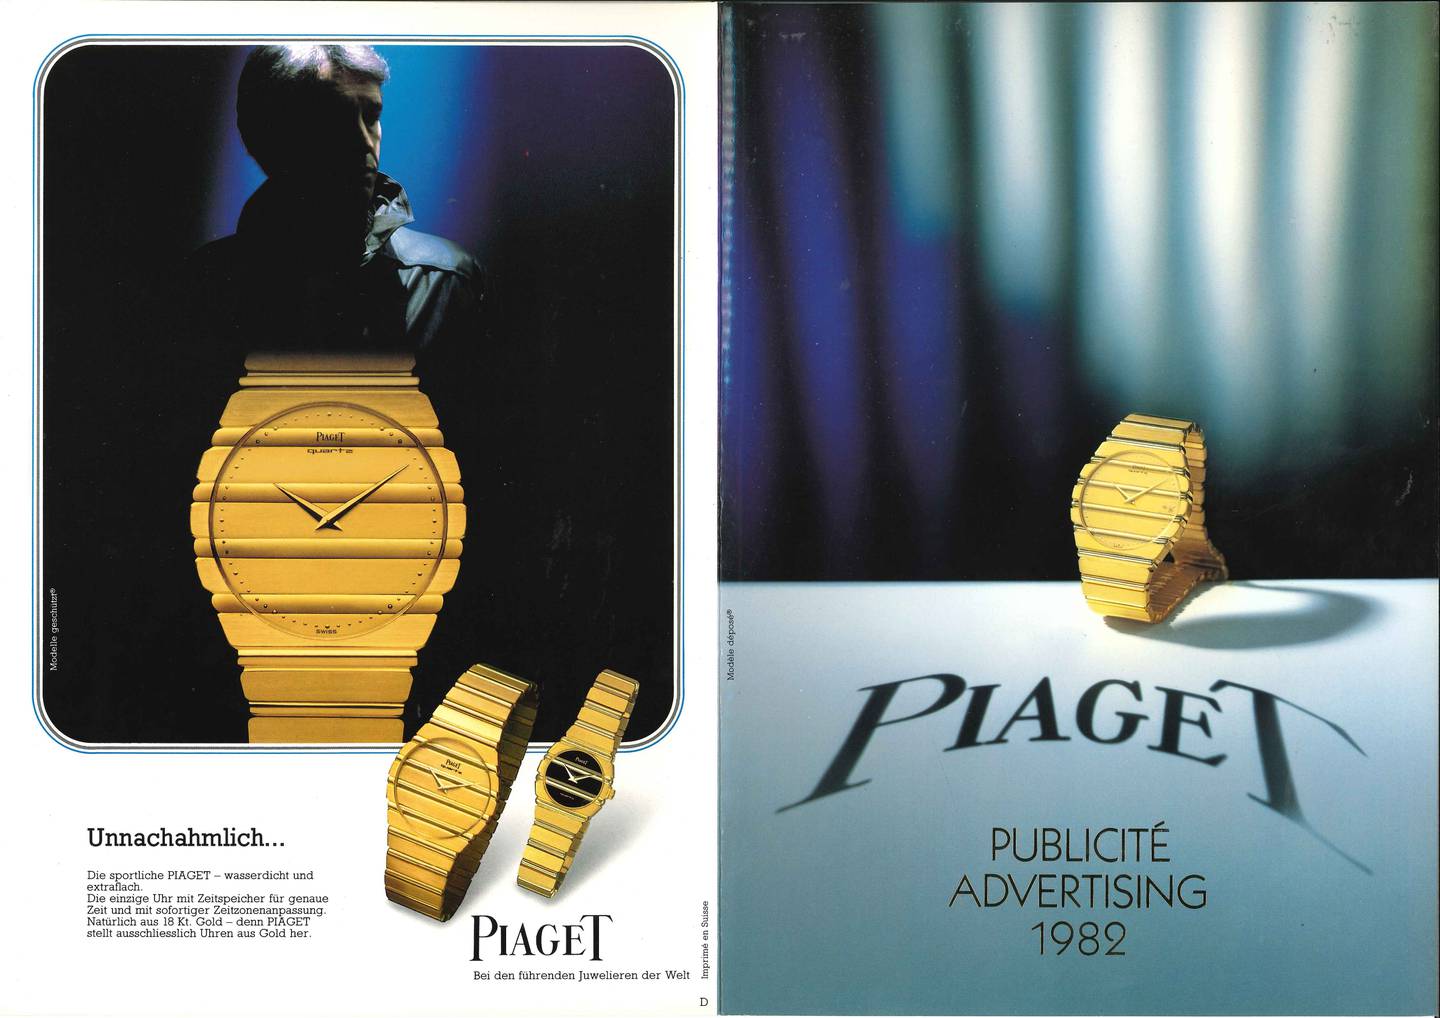 Piaget advertising campaign in 1982.